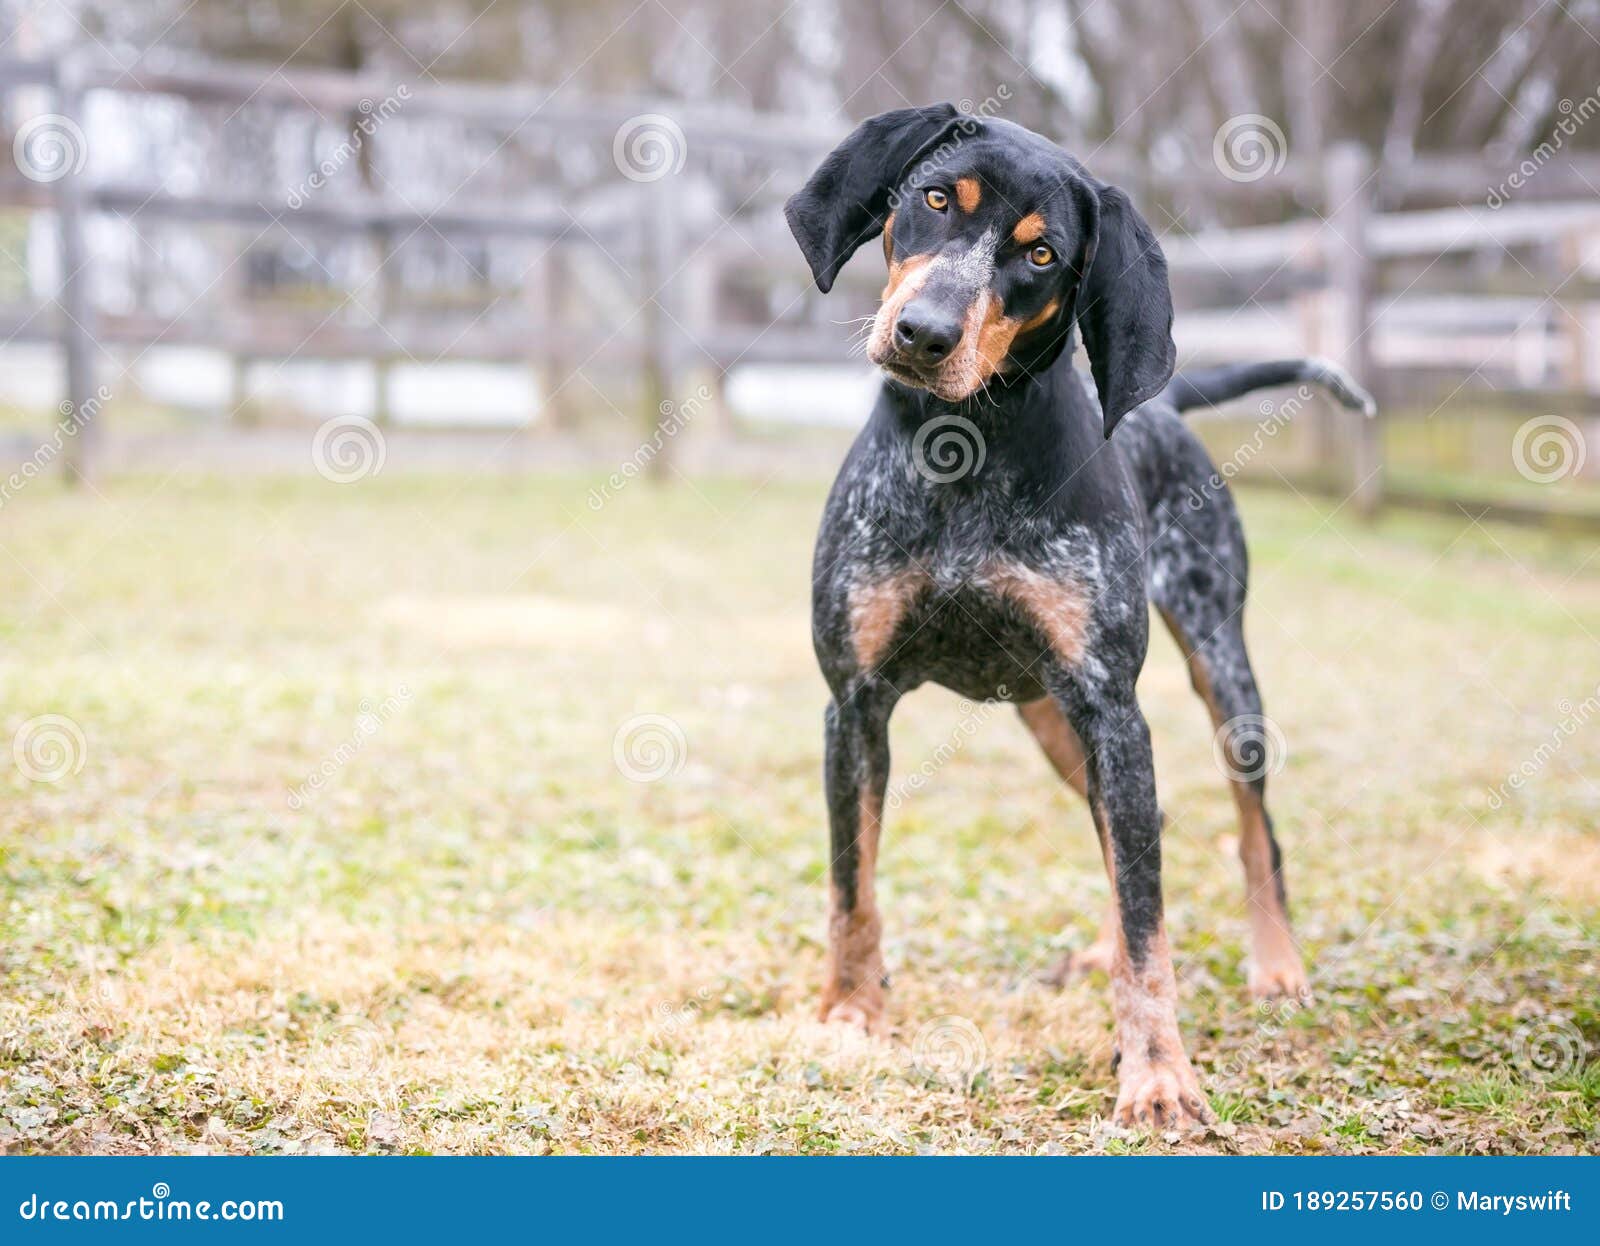 Bluetick Hound Photos Free Royalty Free Stock Photos From Dreamstime